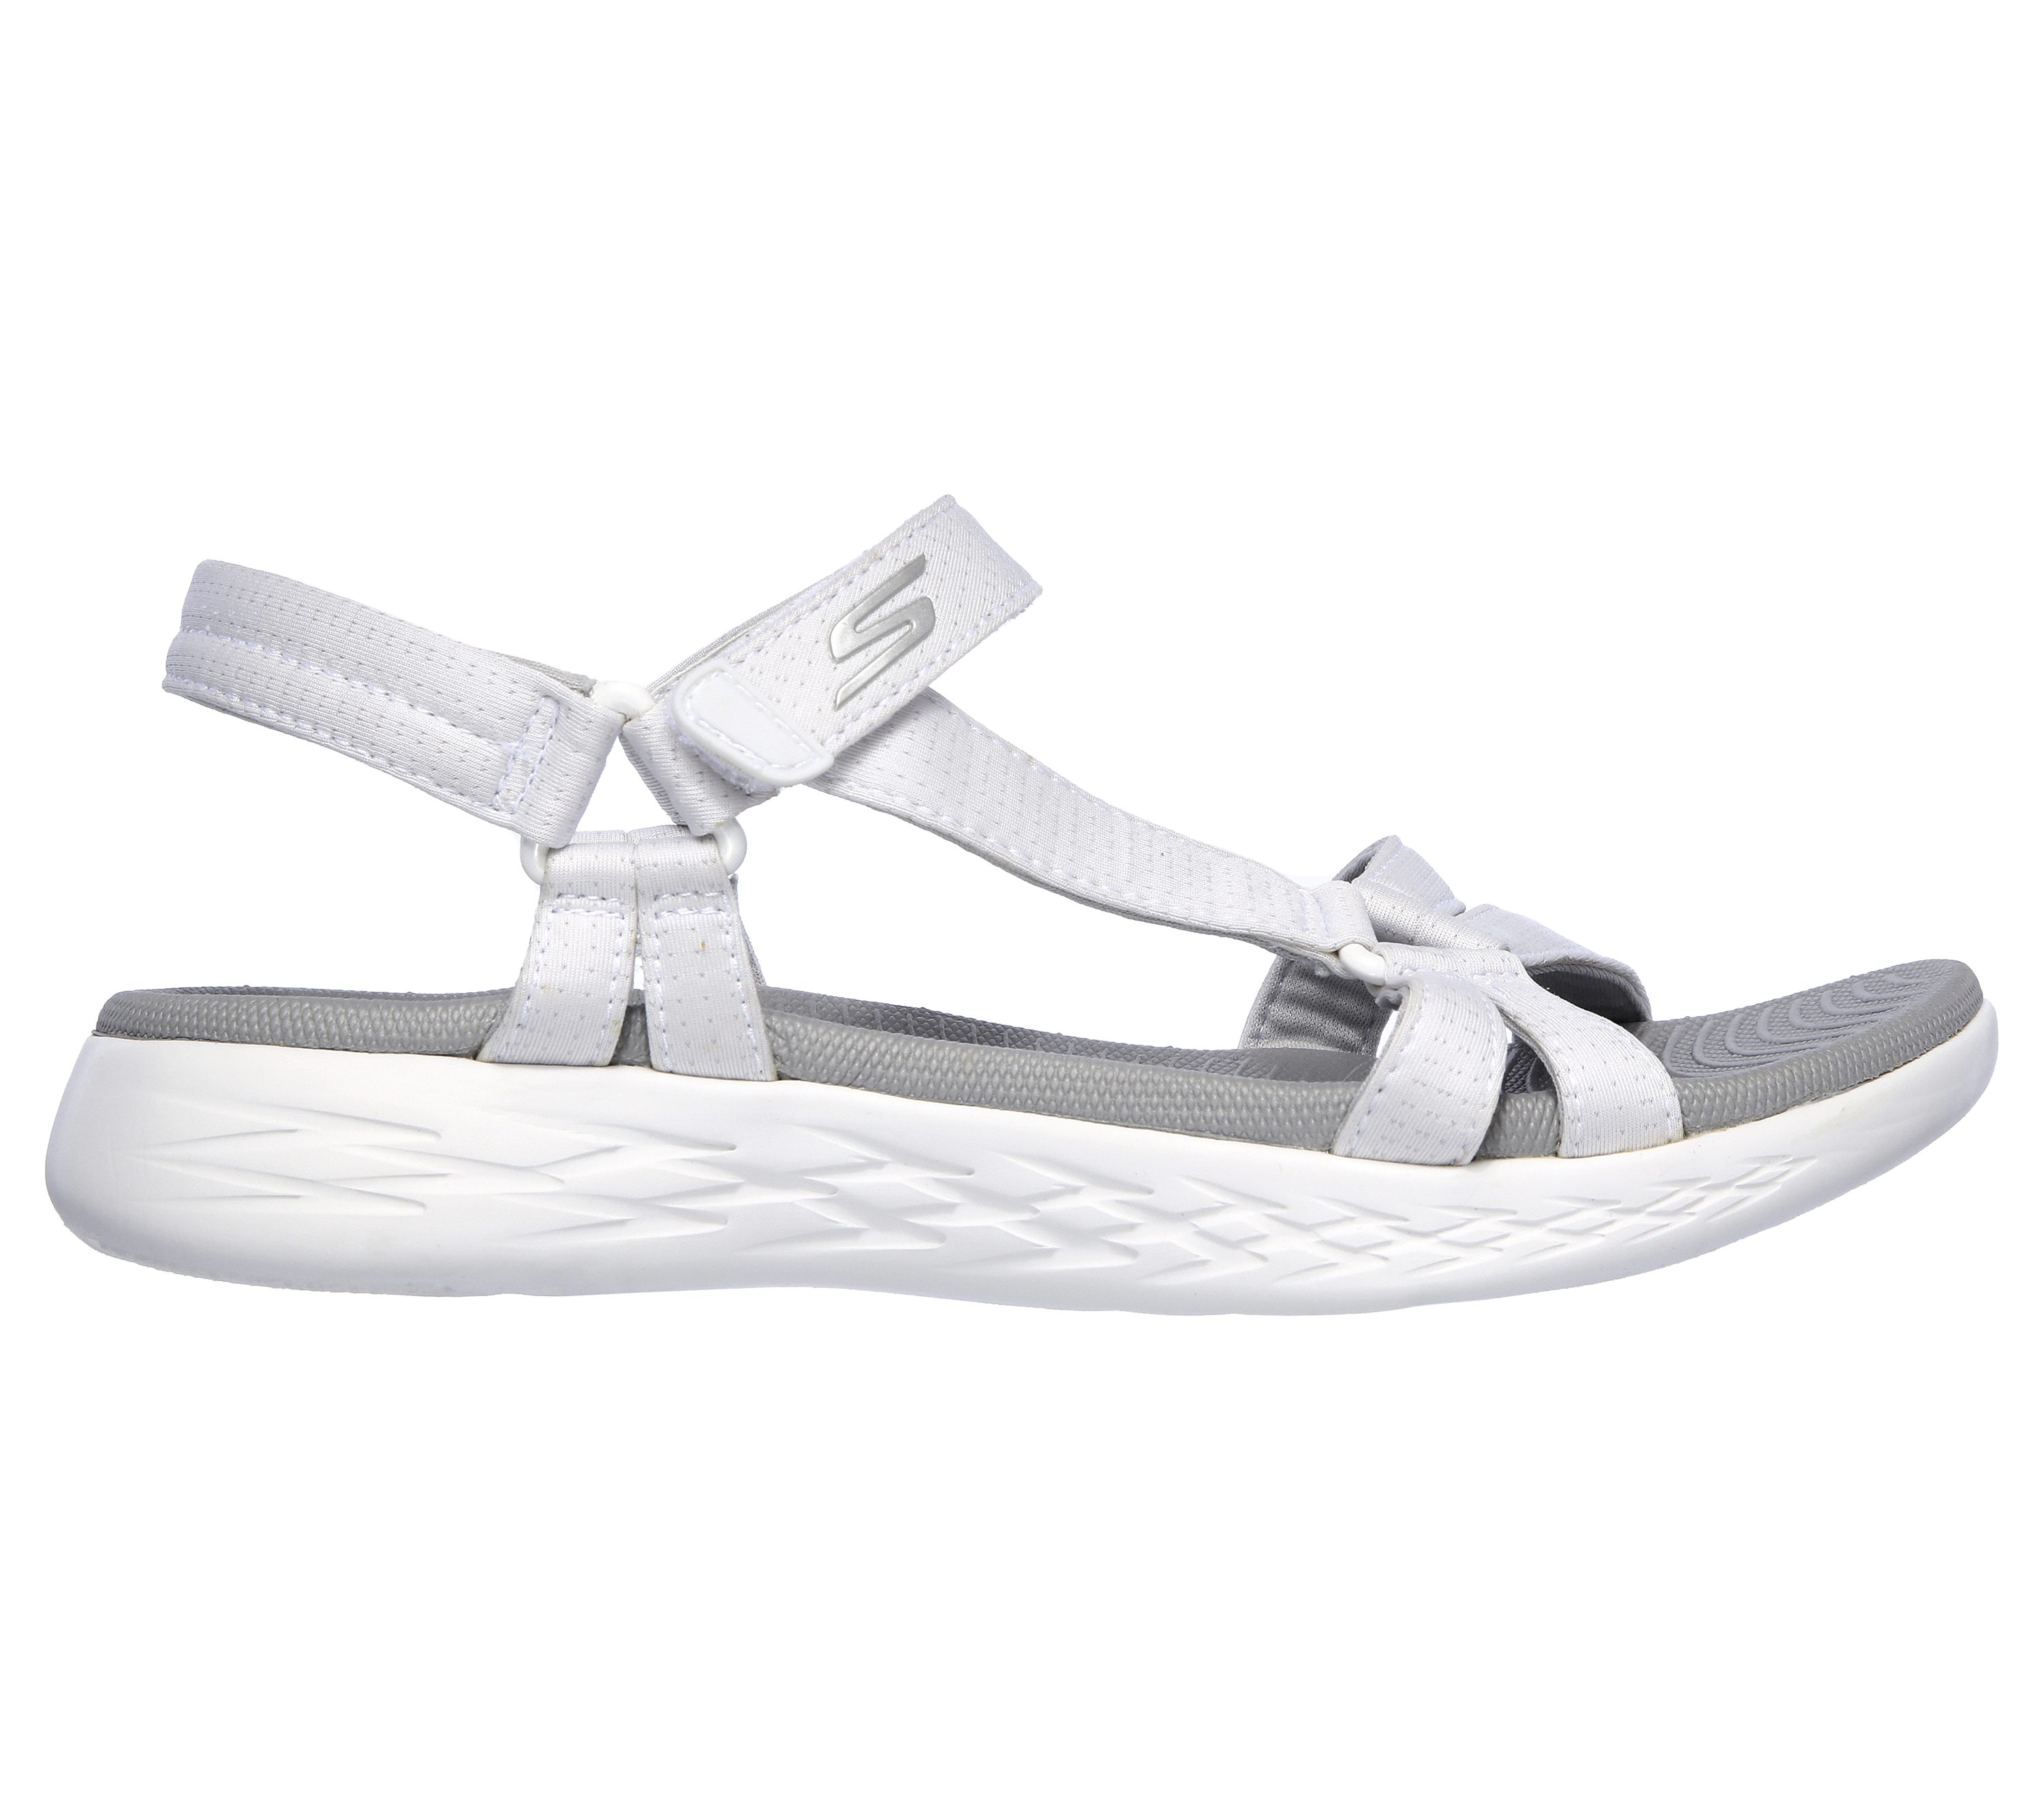 skechers sandals discontinued styles